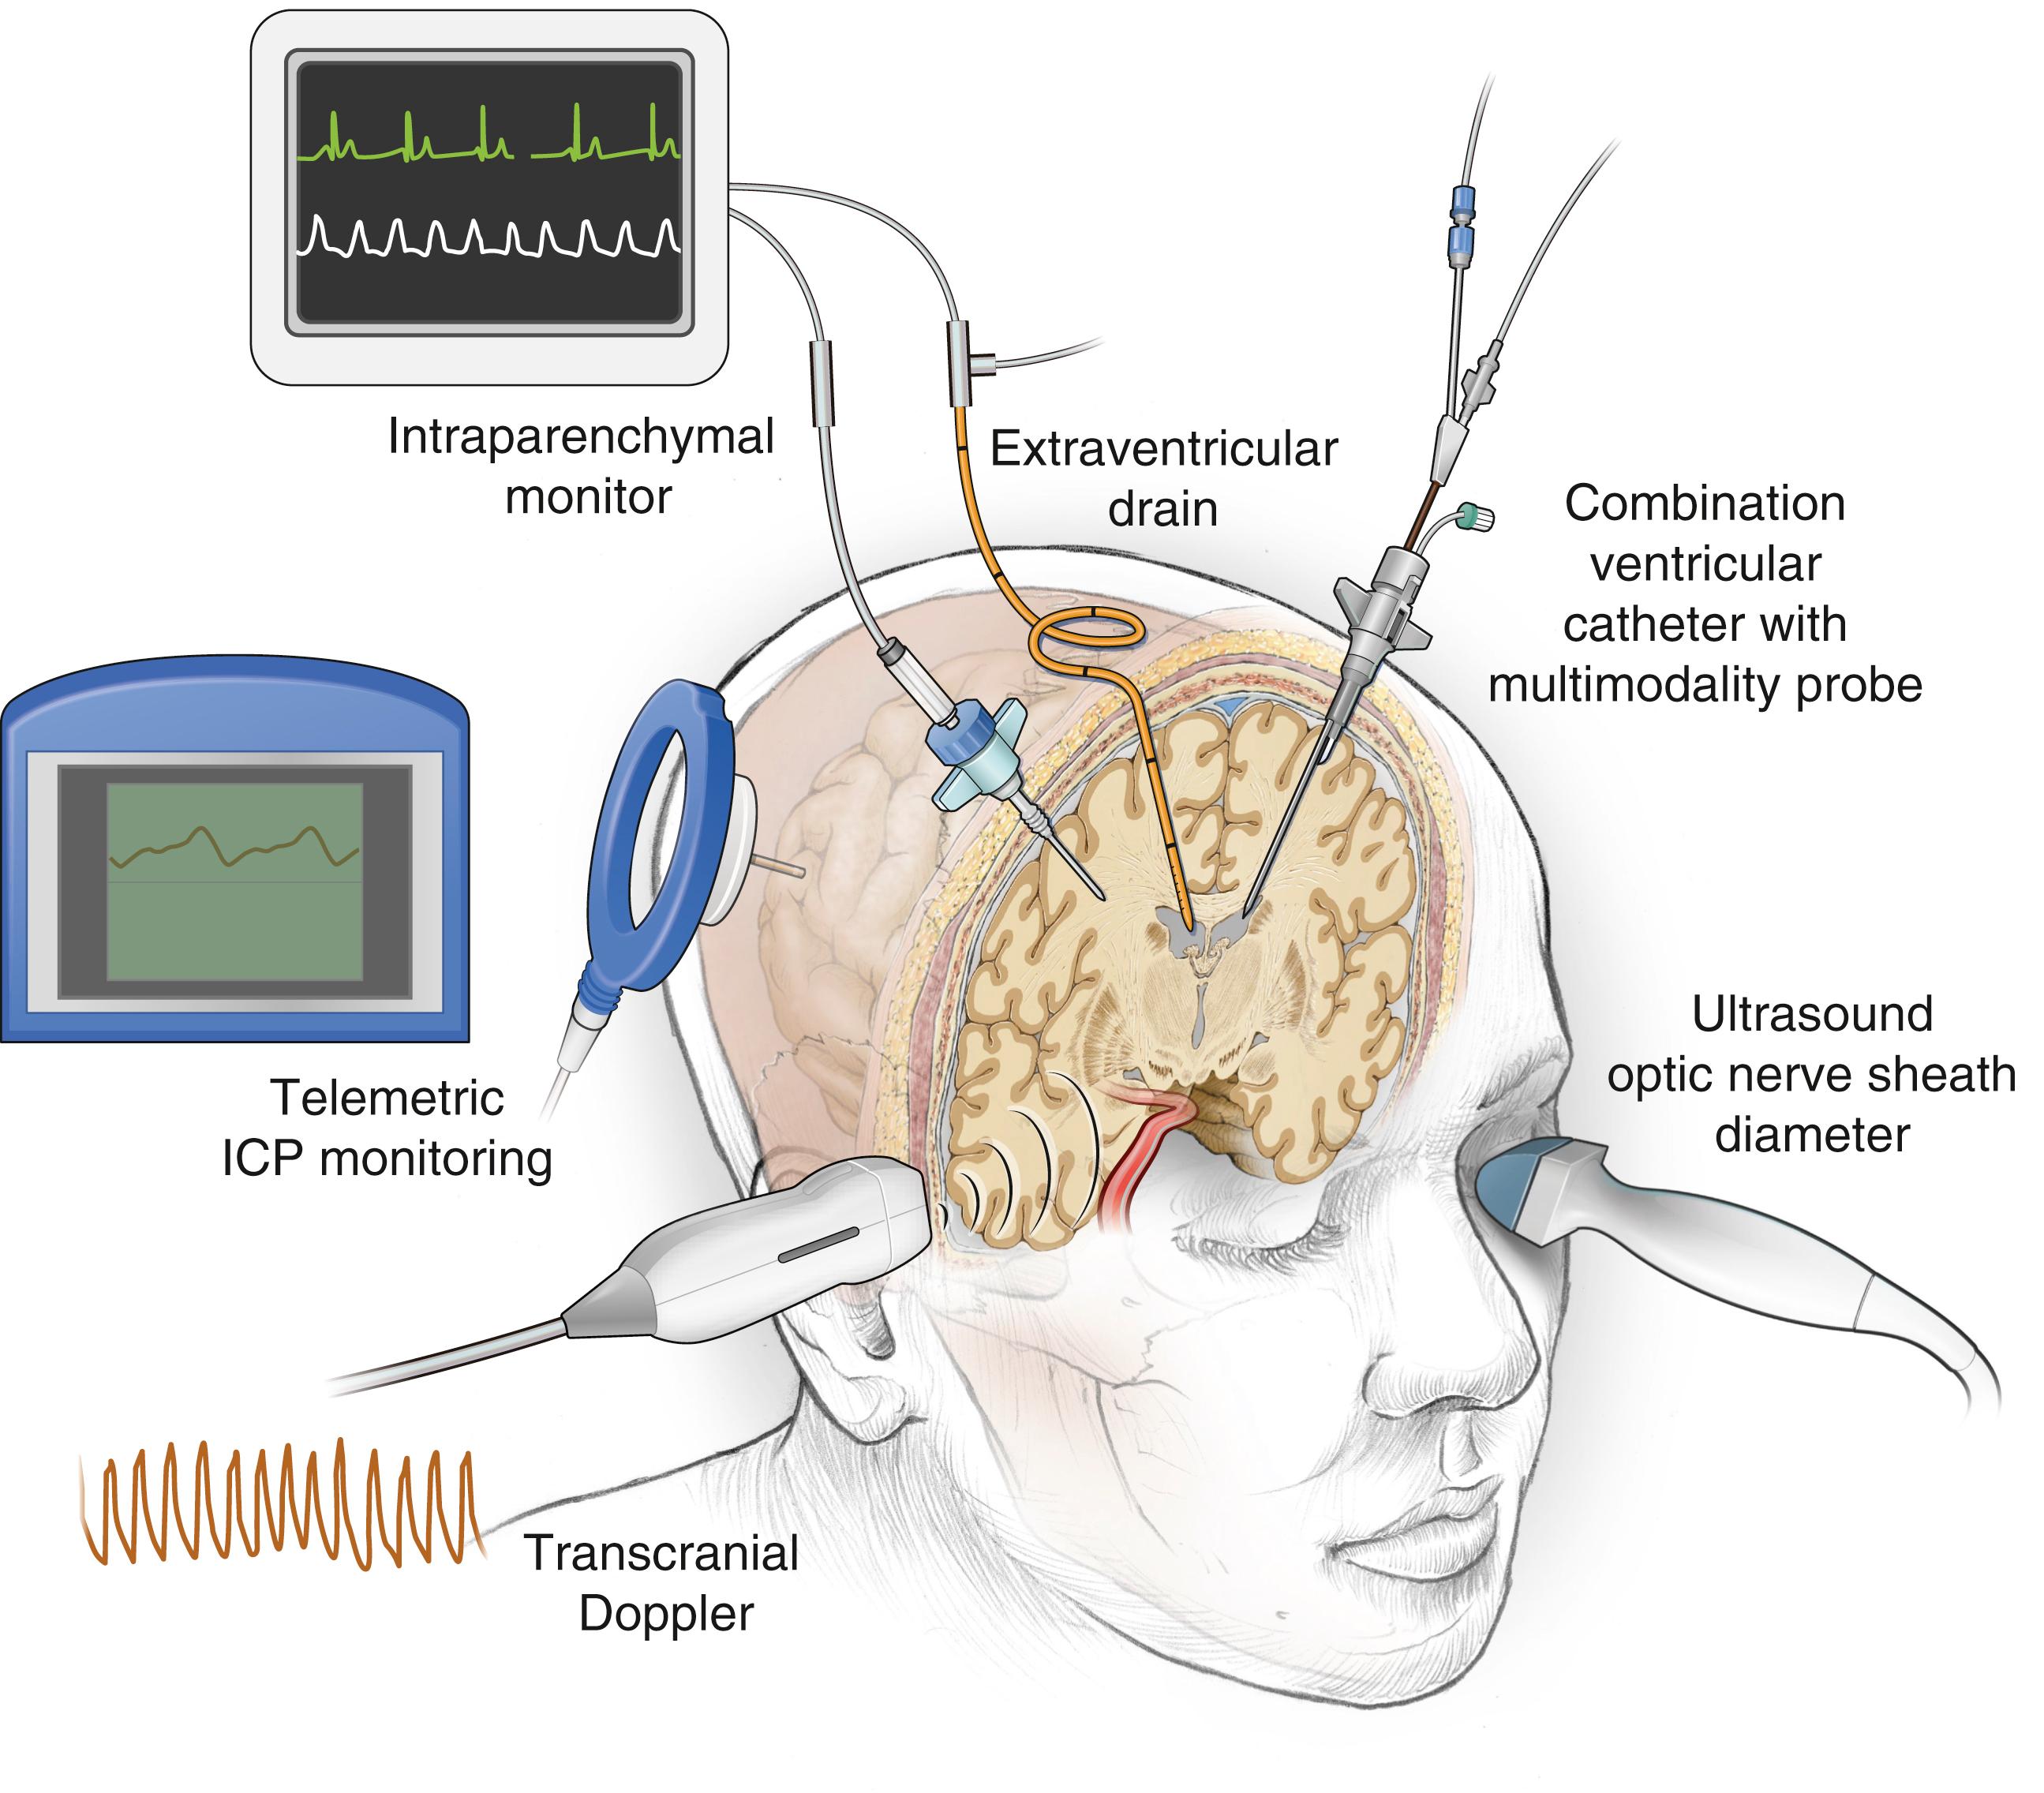 Figure 37.1, There are many invasive and noninvasive methods for intracranial pressure (ICP) monitoring, some of which are shown here. See the text for detailed descriptions of each method.